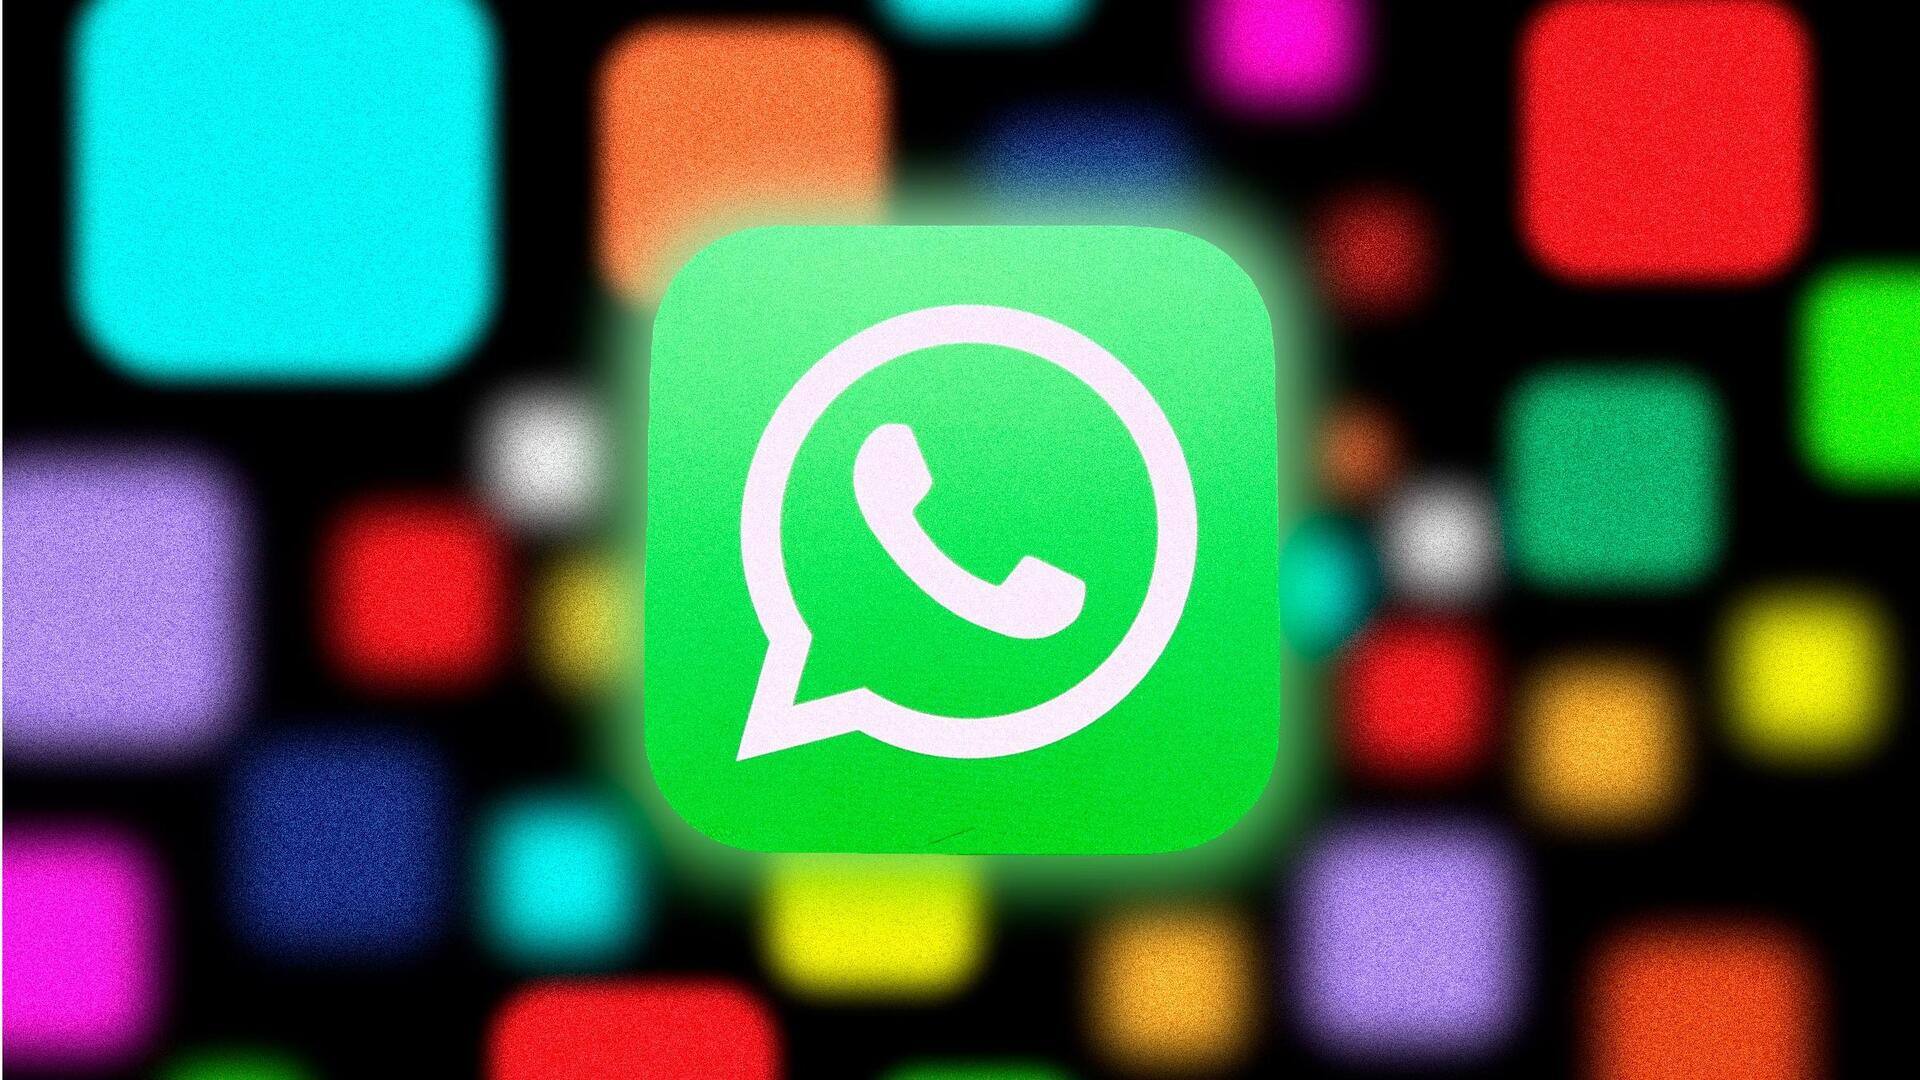 WhatsApp rolls out 'Search by Date' feature on Android devices